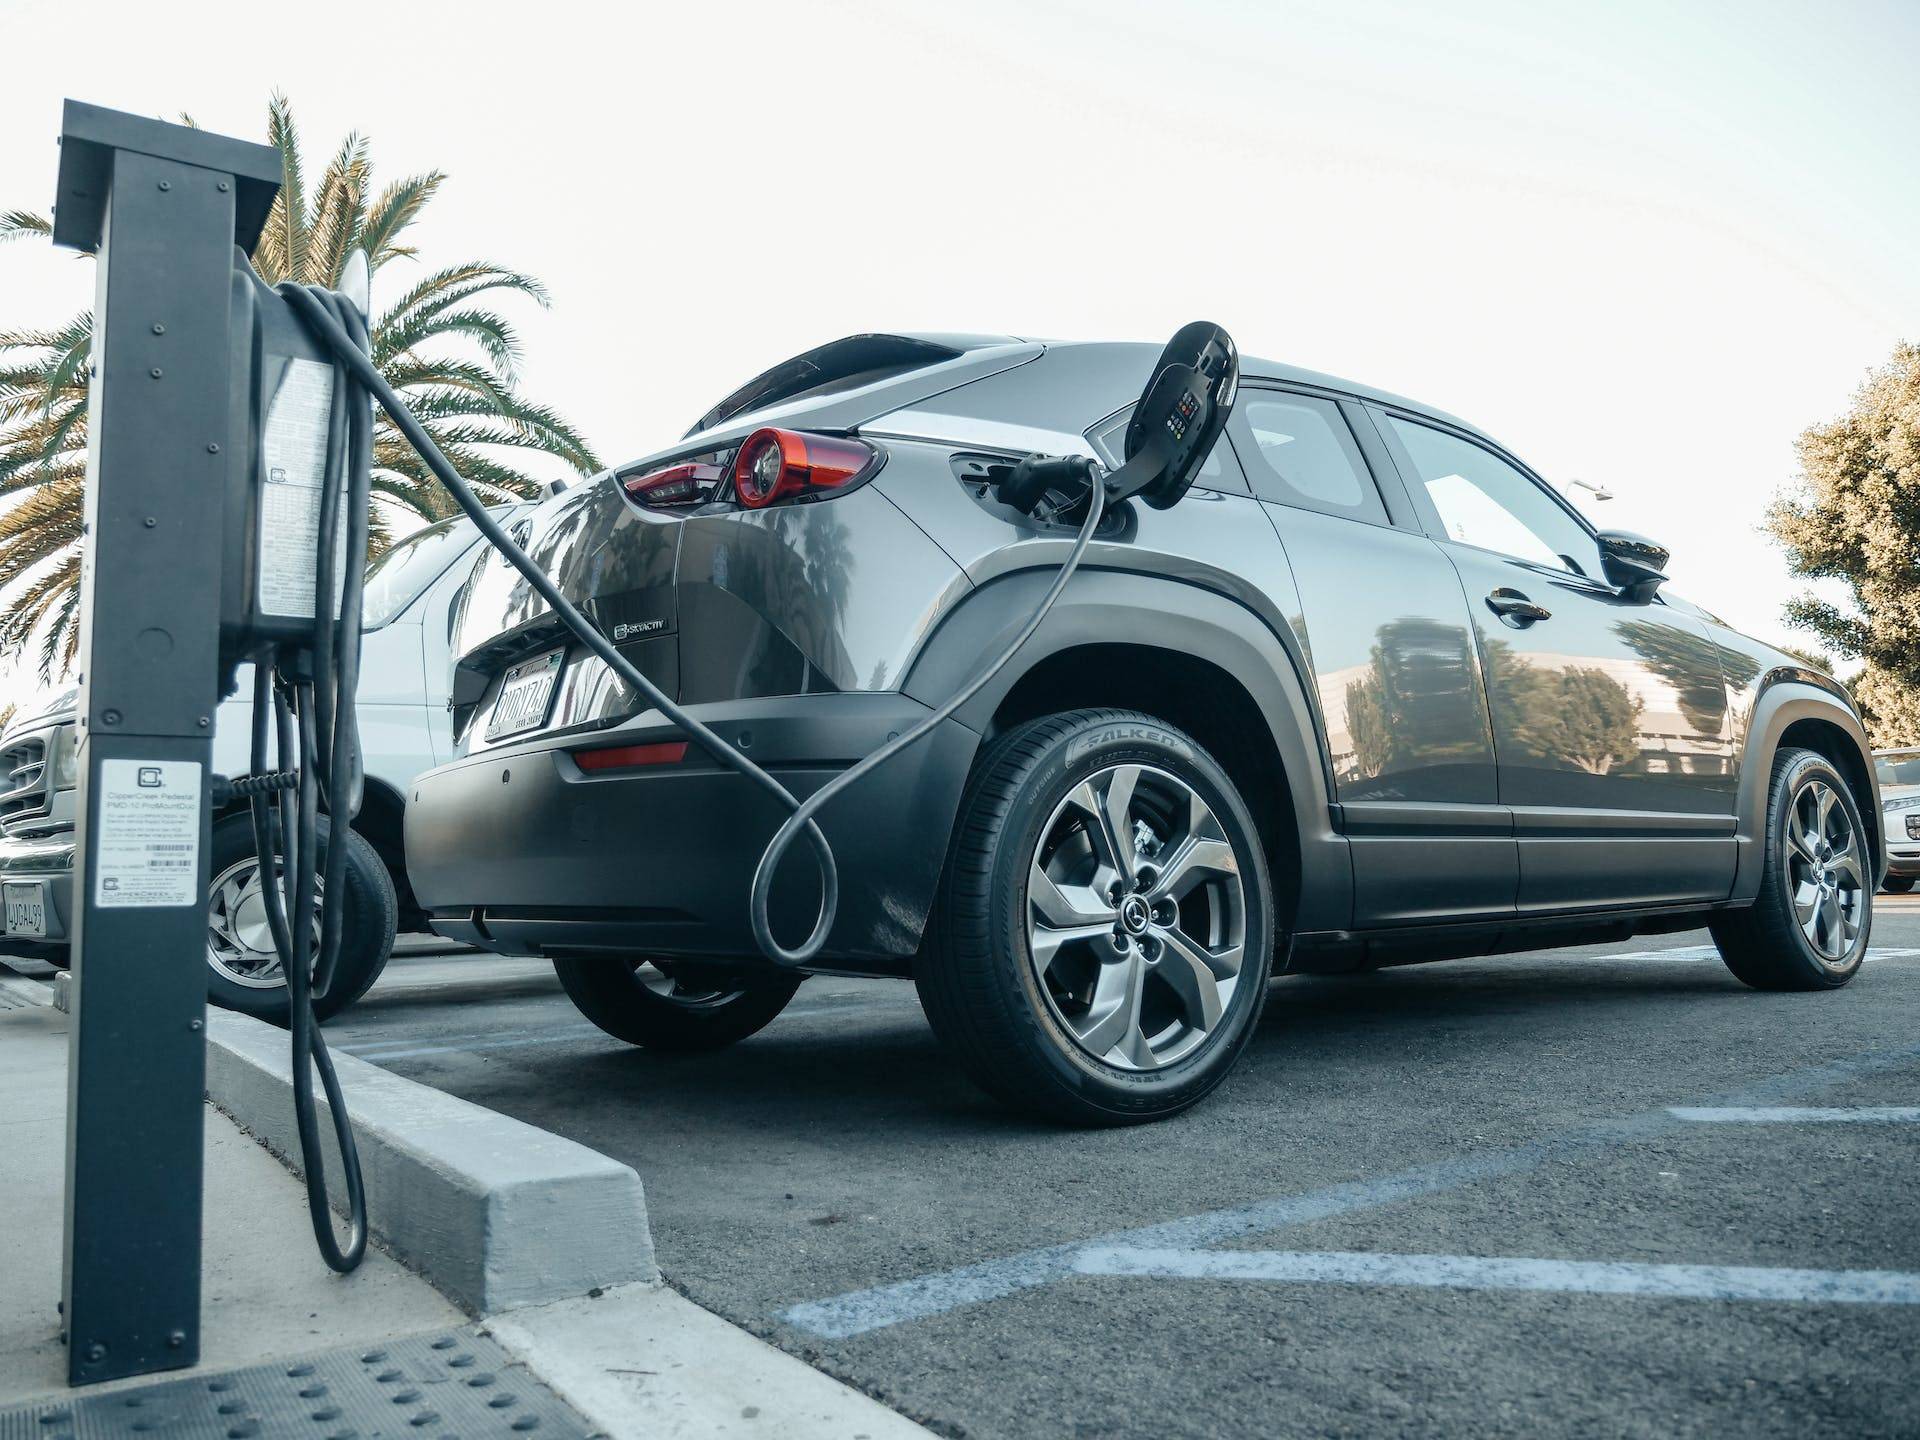 Electric car charging at a public station, made possible by the hard work of a Technical Writer developing Standard Operating Procedures